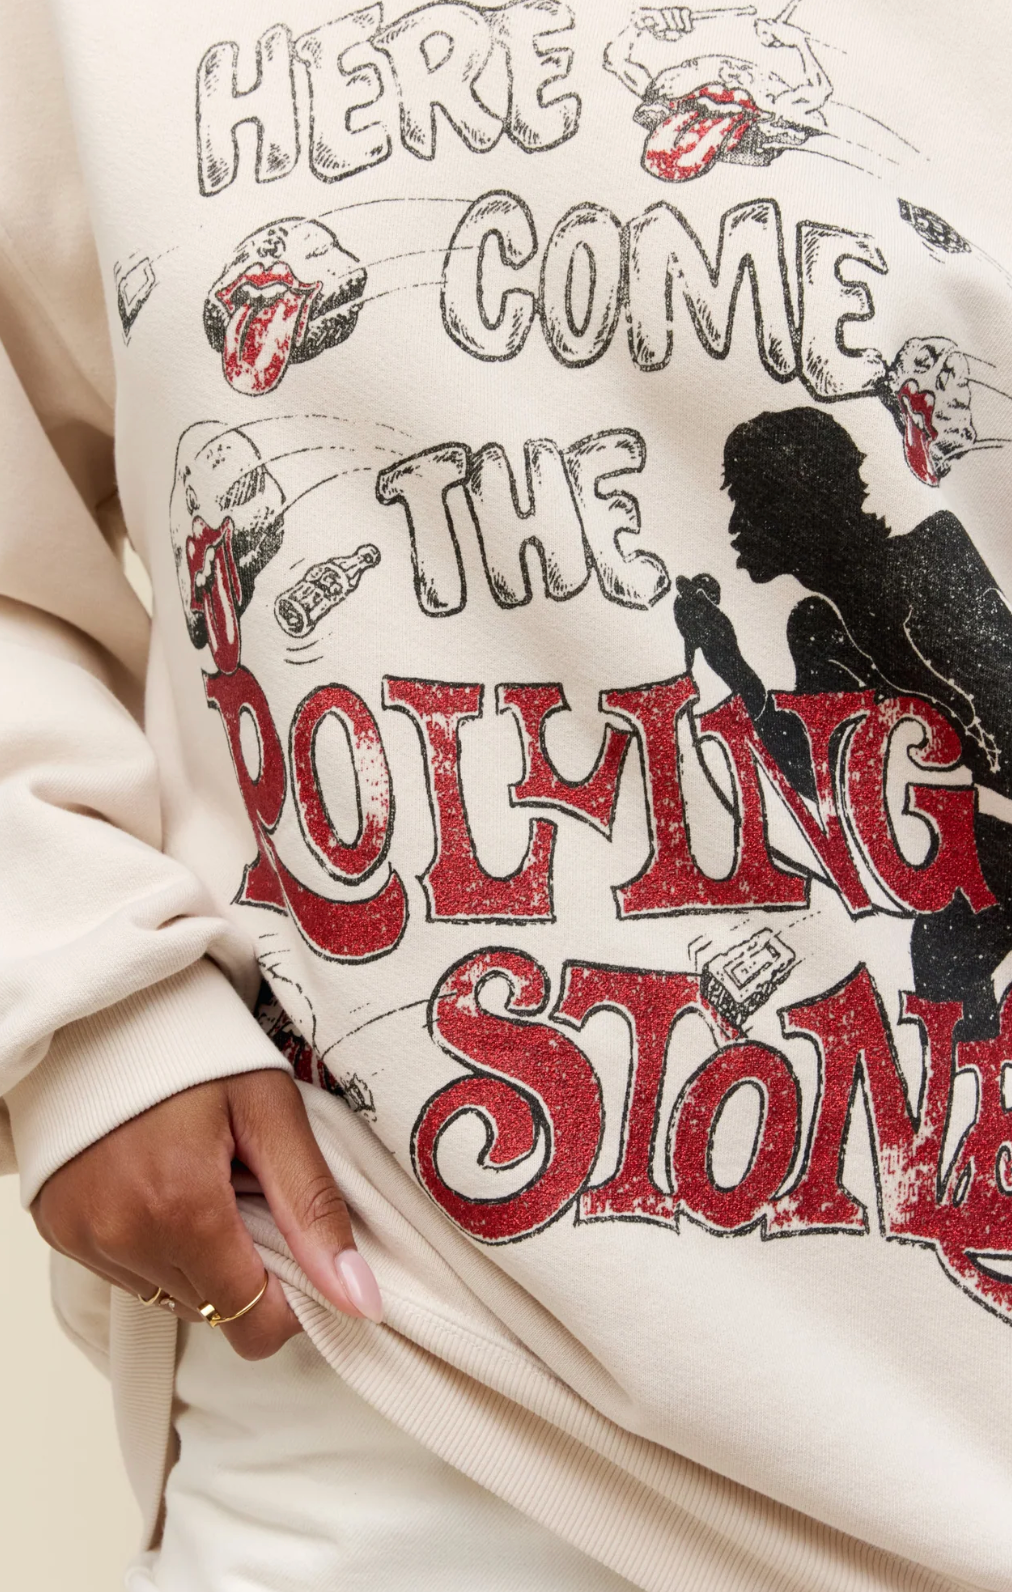 Rolling Stones Here Comes the Stones Crewneck